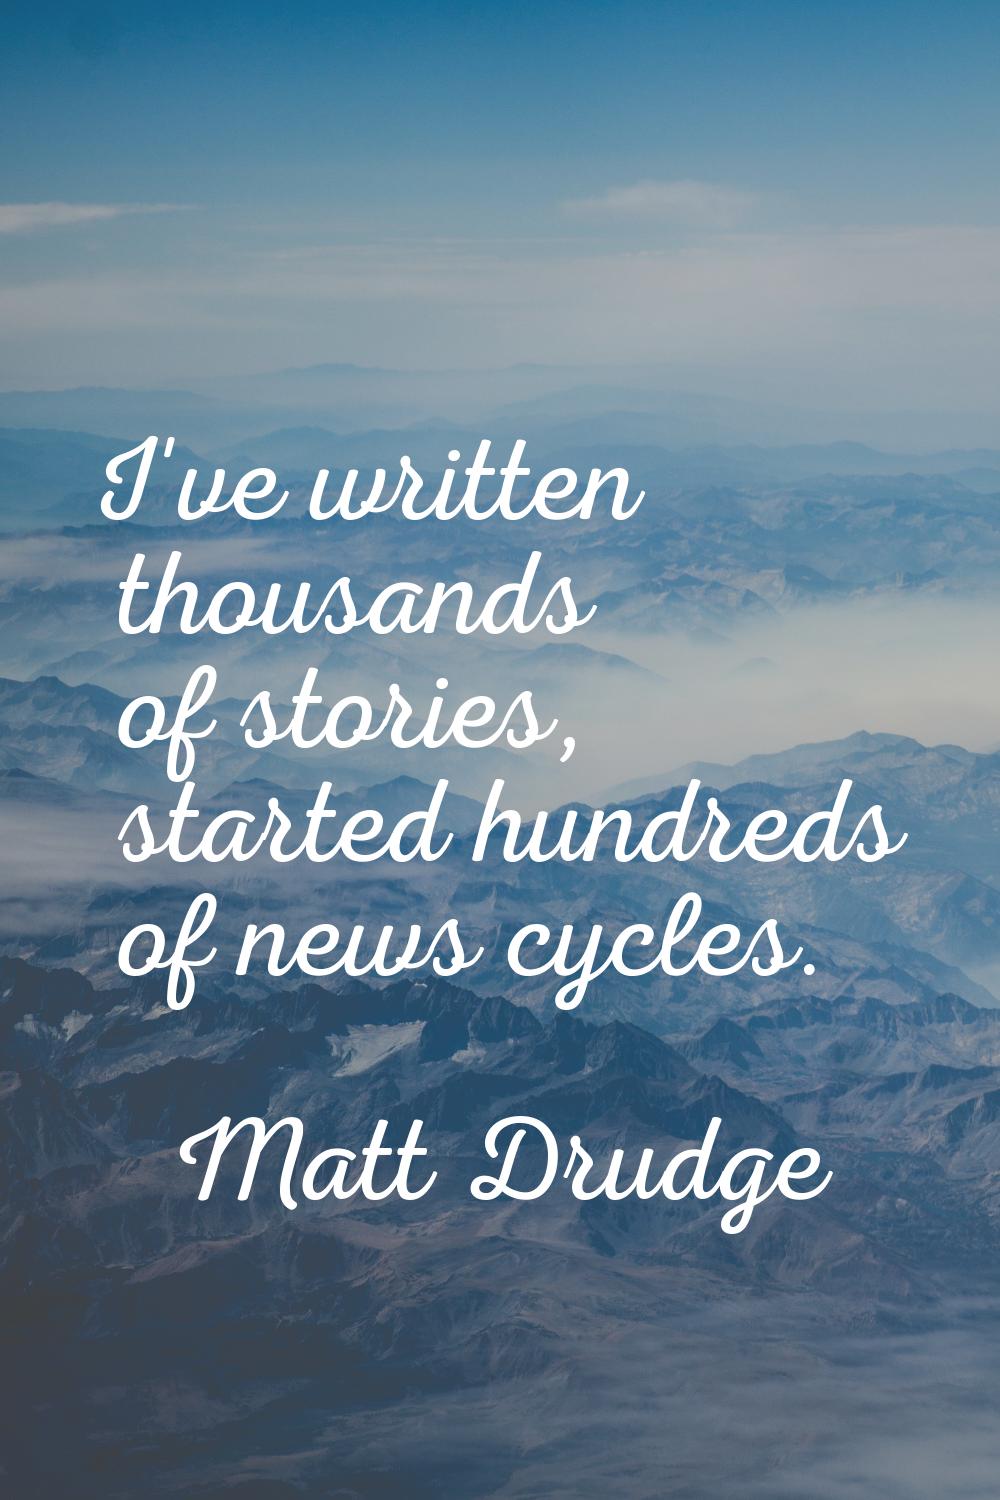 I've written thousands of stories, started hundreds of news cycles.